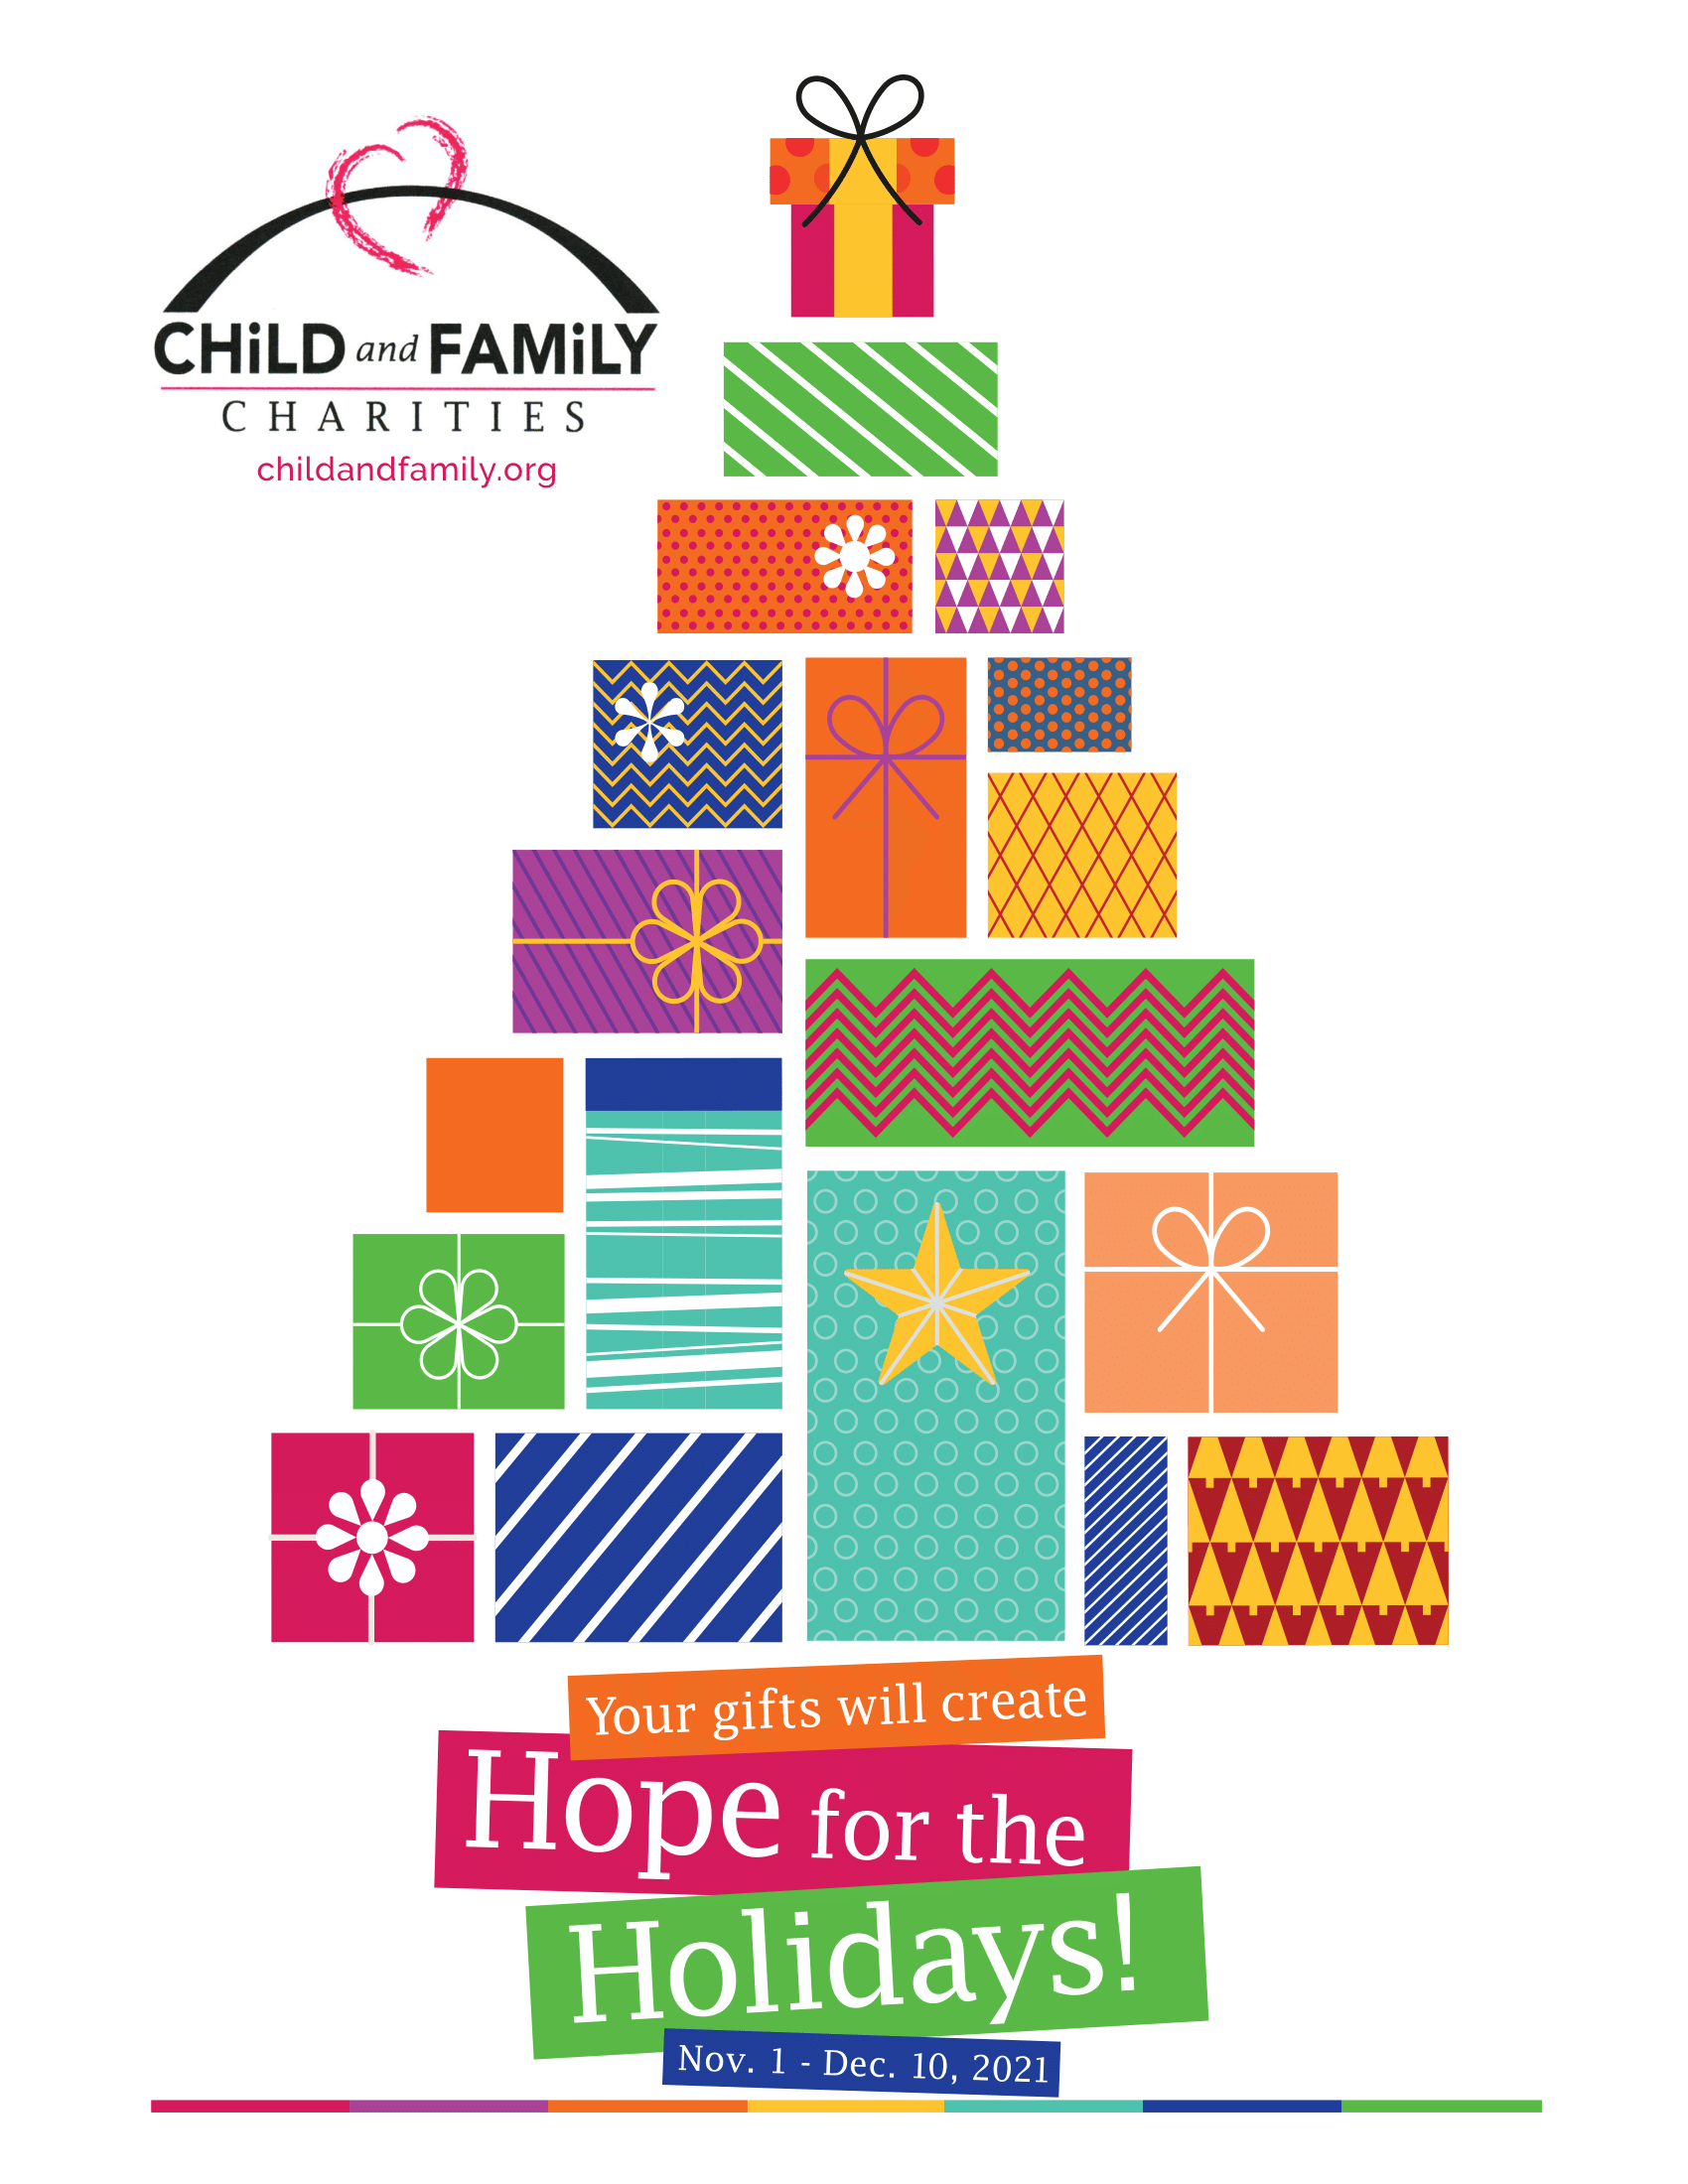 Hope for Holidays Flier Page 1